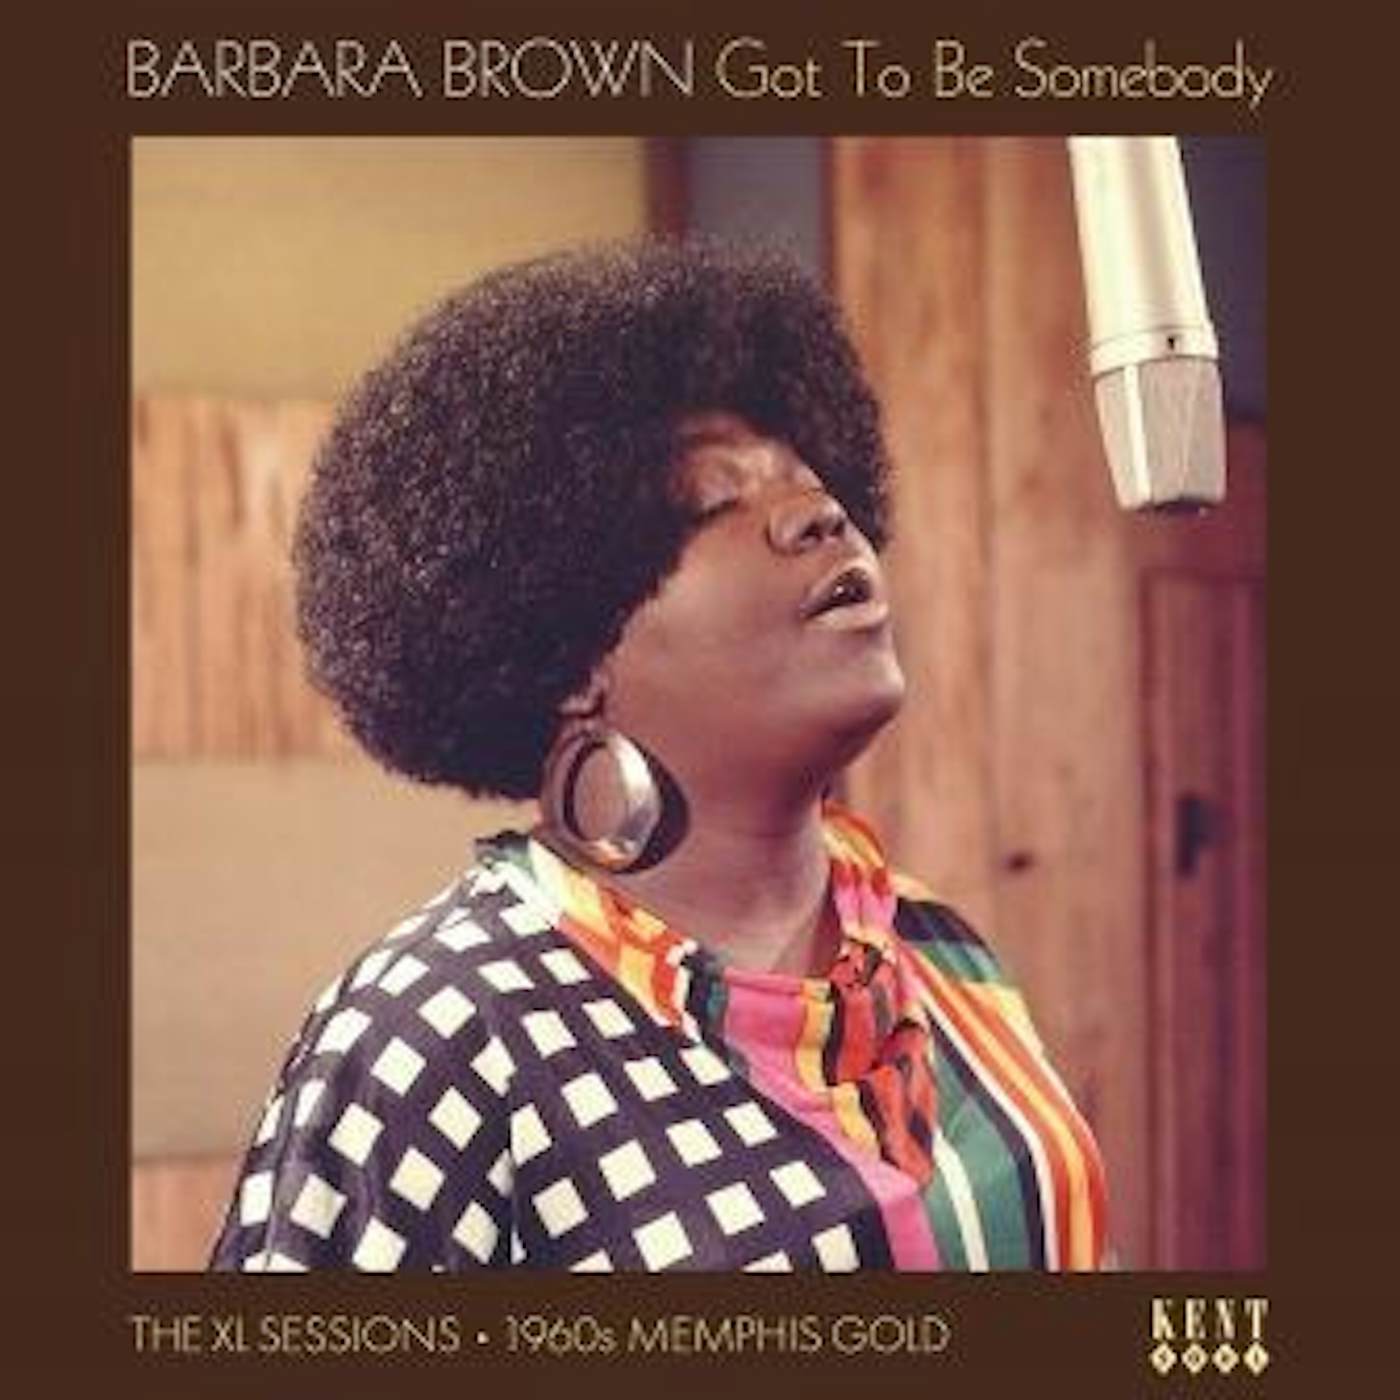 Barbara Brown GOT TO BE SOMEBODY: THE XL SESSIONS Vinyl Record